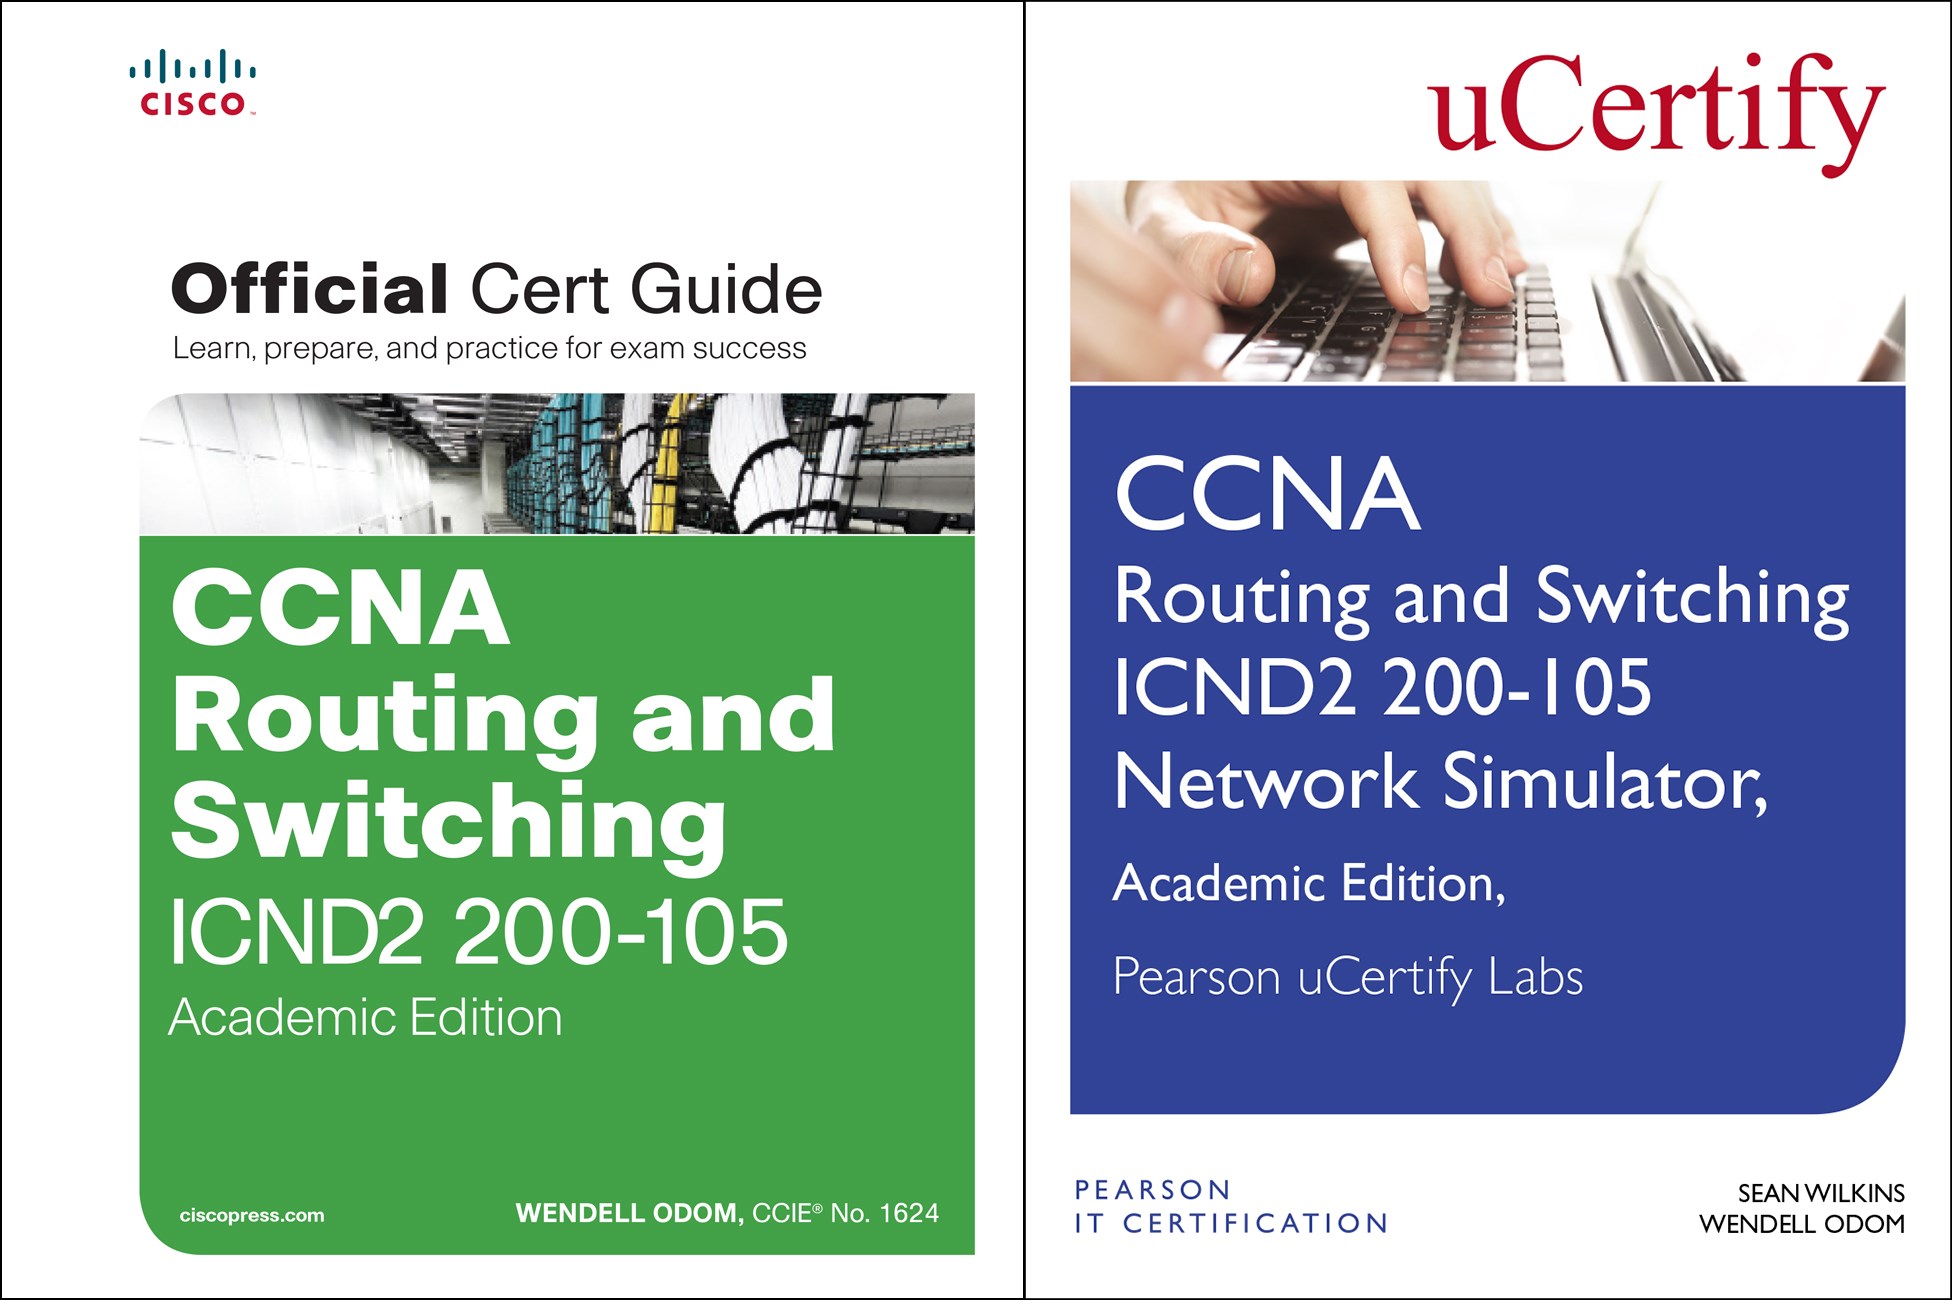 CCNA Routing and Switching ICND2 200-105 Official Cert Guide and Pearson uCertify Network Simulator Academic Edition Bundle